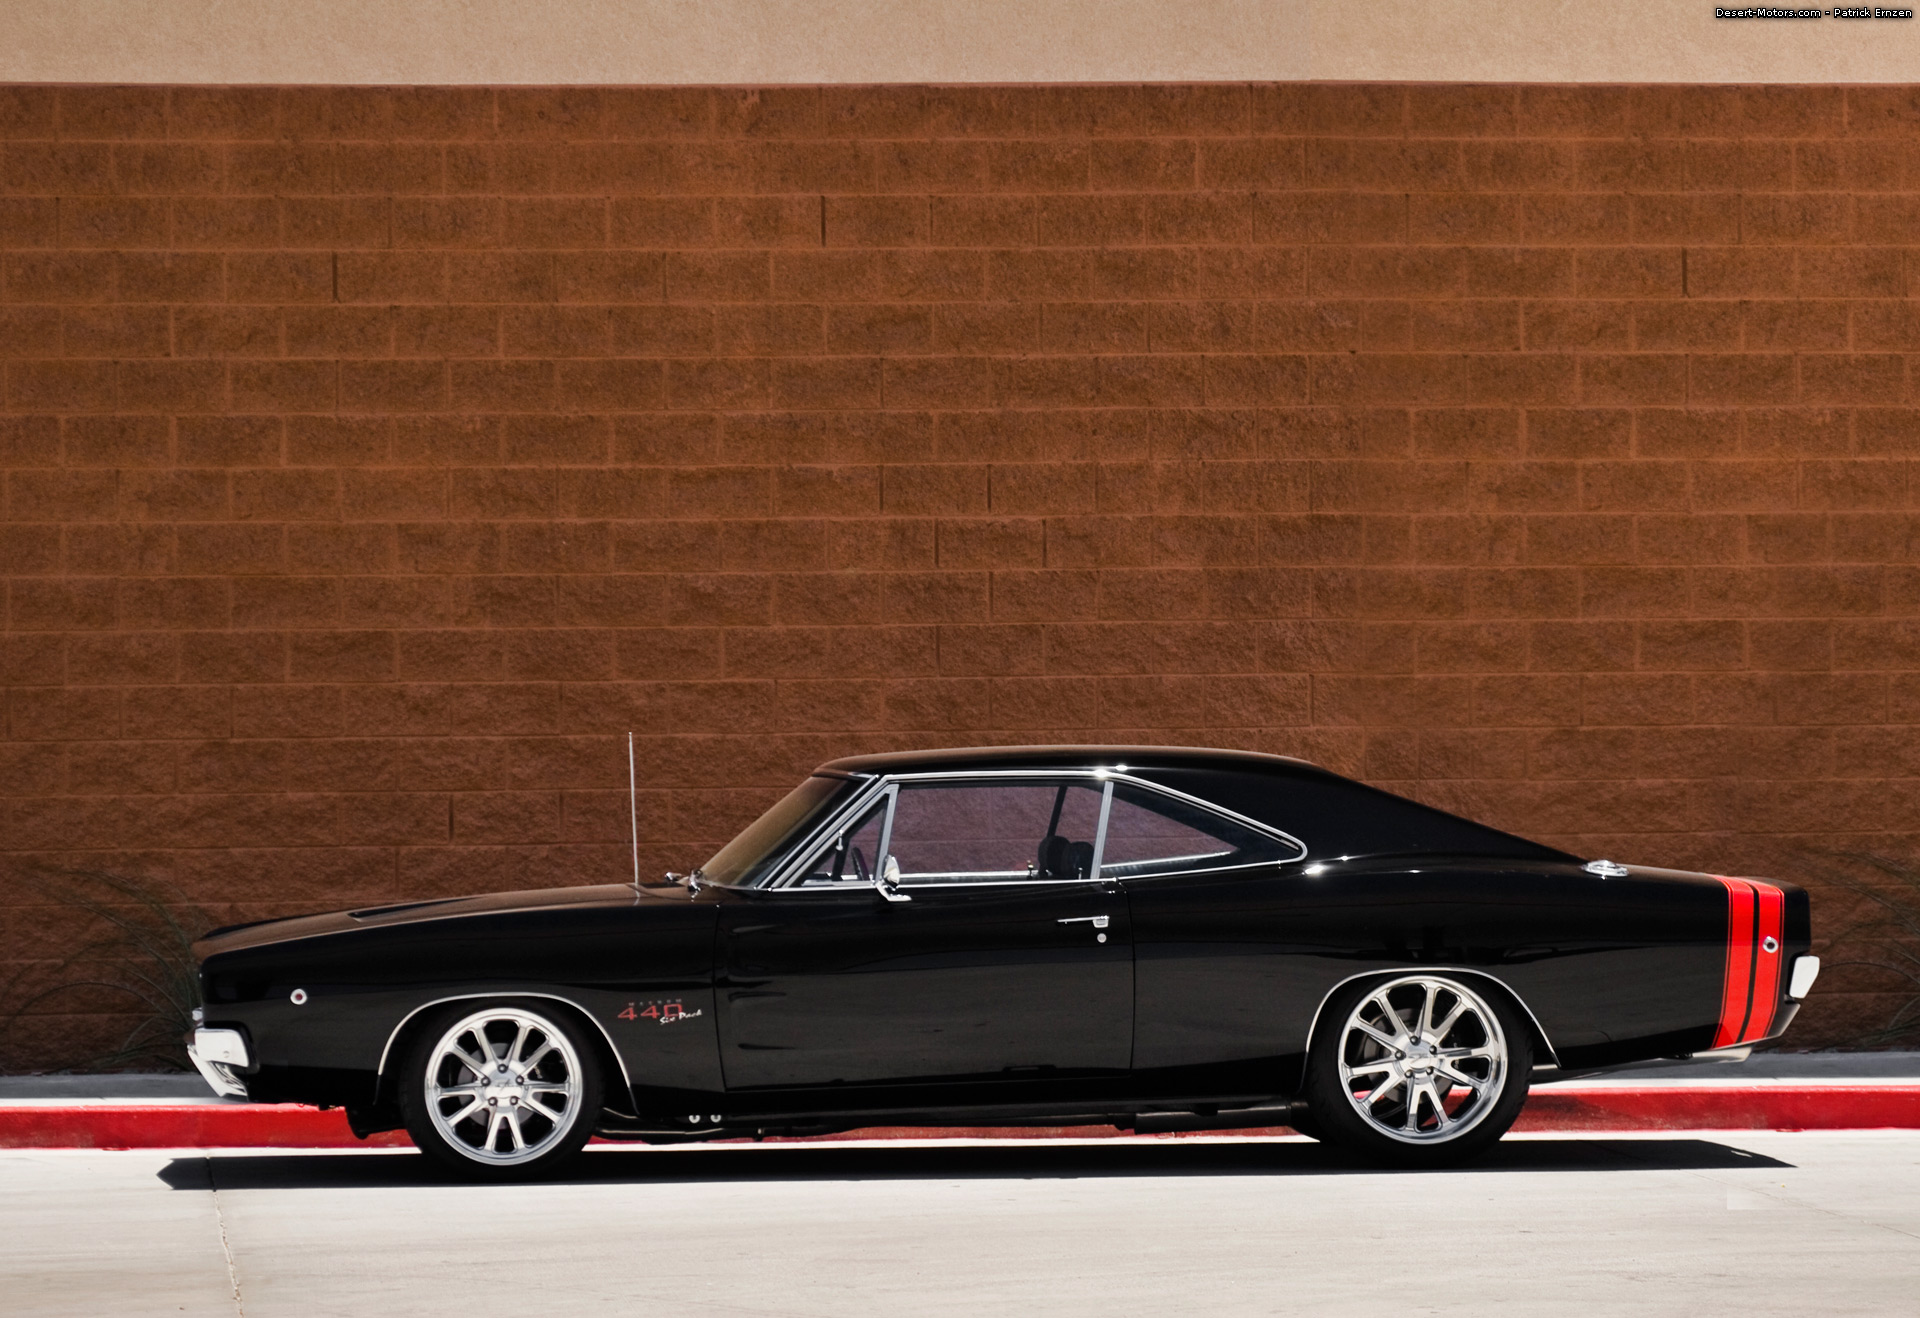 cars, muscle cars, 1969, vehicles, Dodge Charger R/T, brick wall, black cars - desktop wallpaper